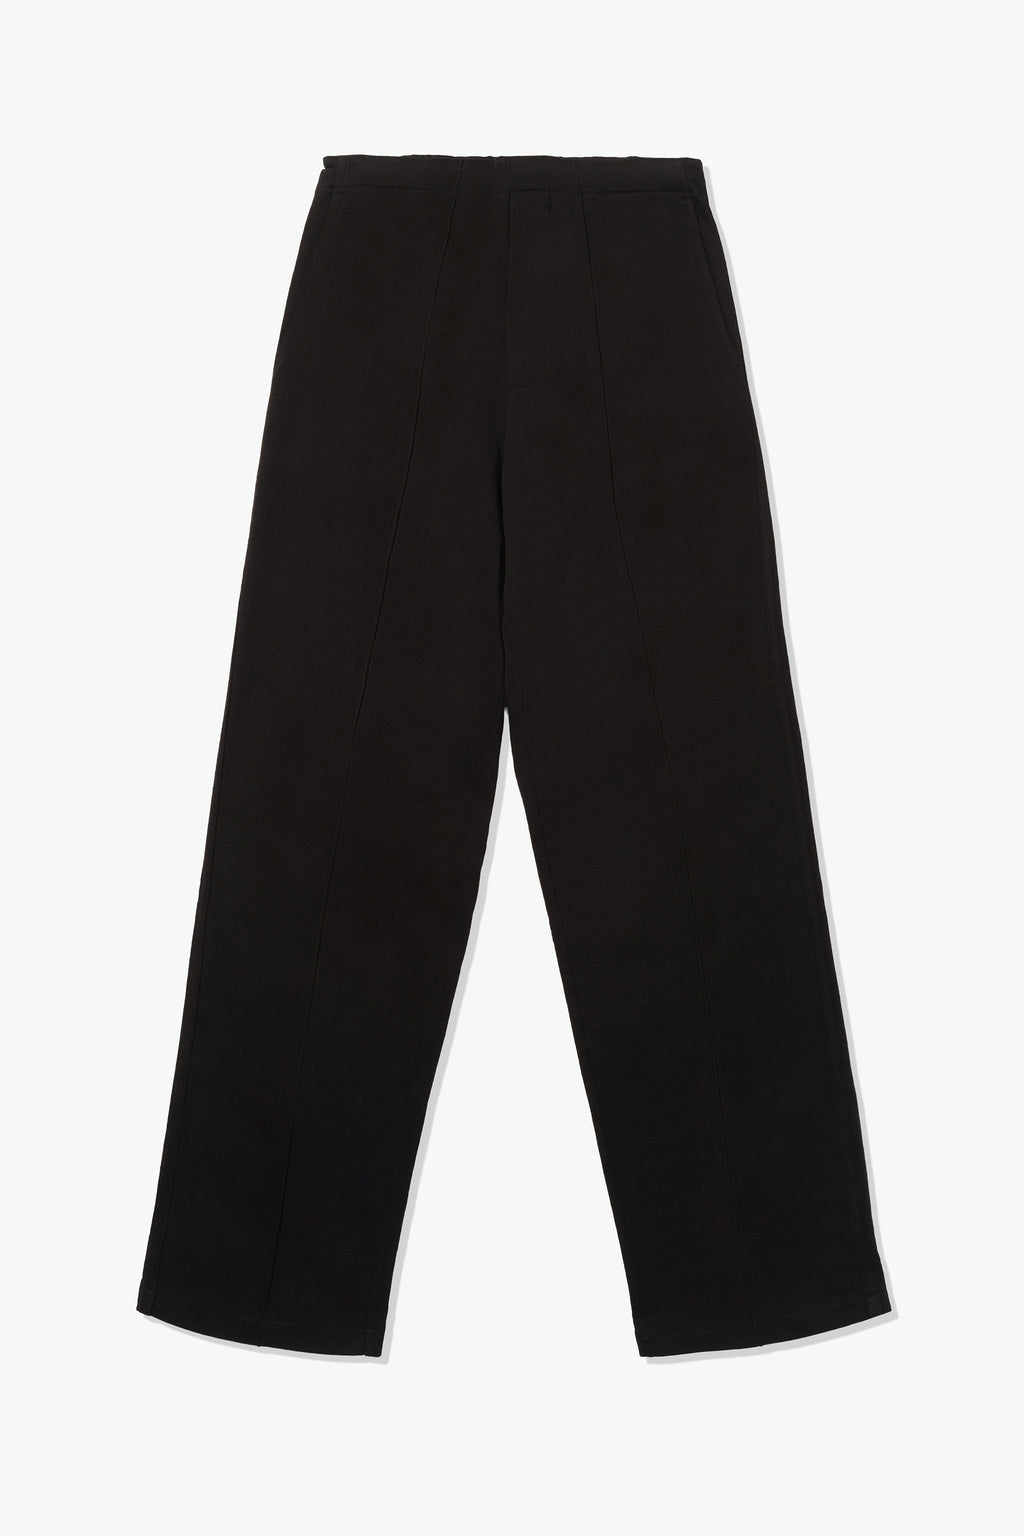 TEXTURED BAND PANT - BLACK – LADY WHITE CO.